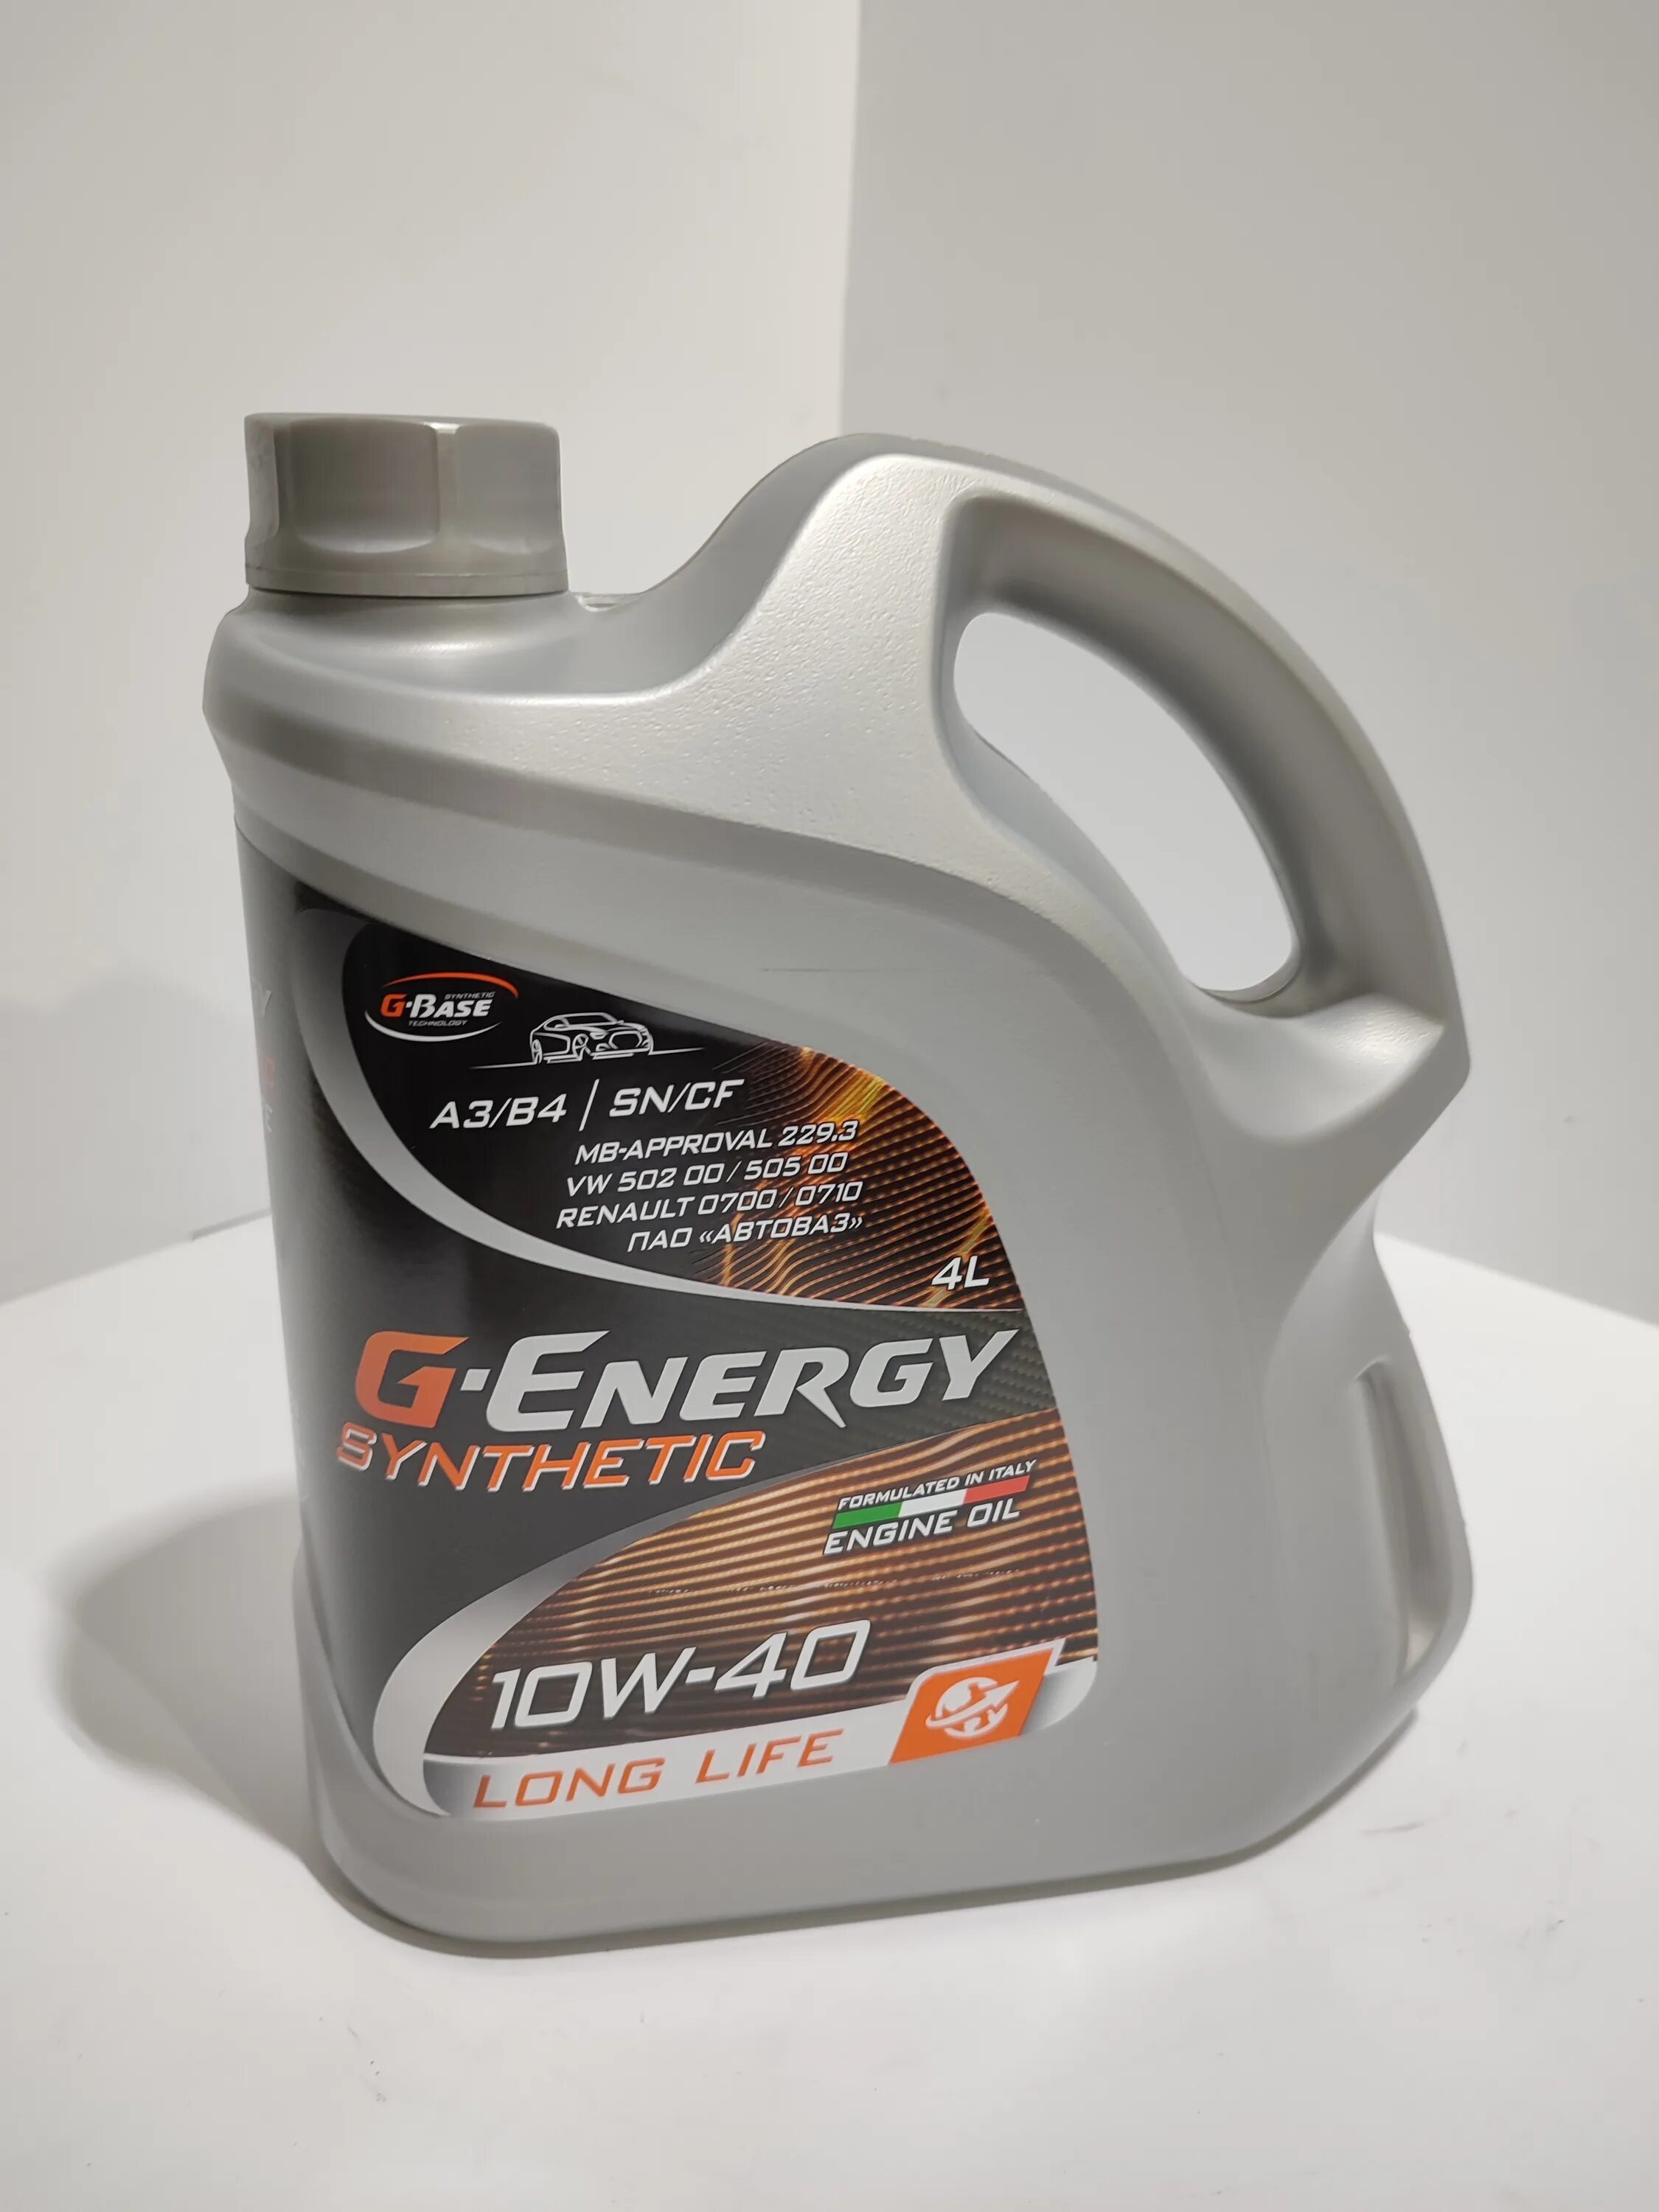 G energy synthetic long life. G Energy 10w 40 long Life. Масло g Energy 10w 40. G Energy 5w30 8034108190099. Машинное масло g-Energy Active 5w30.